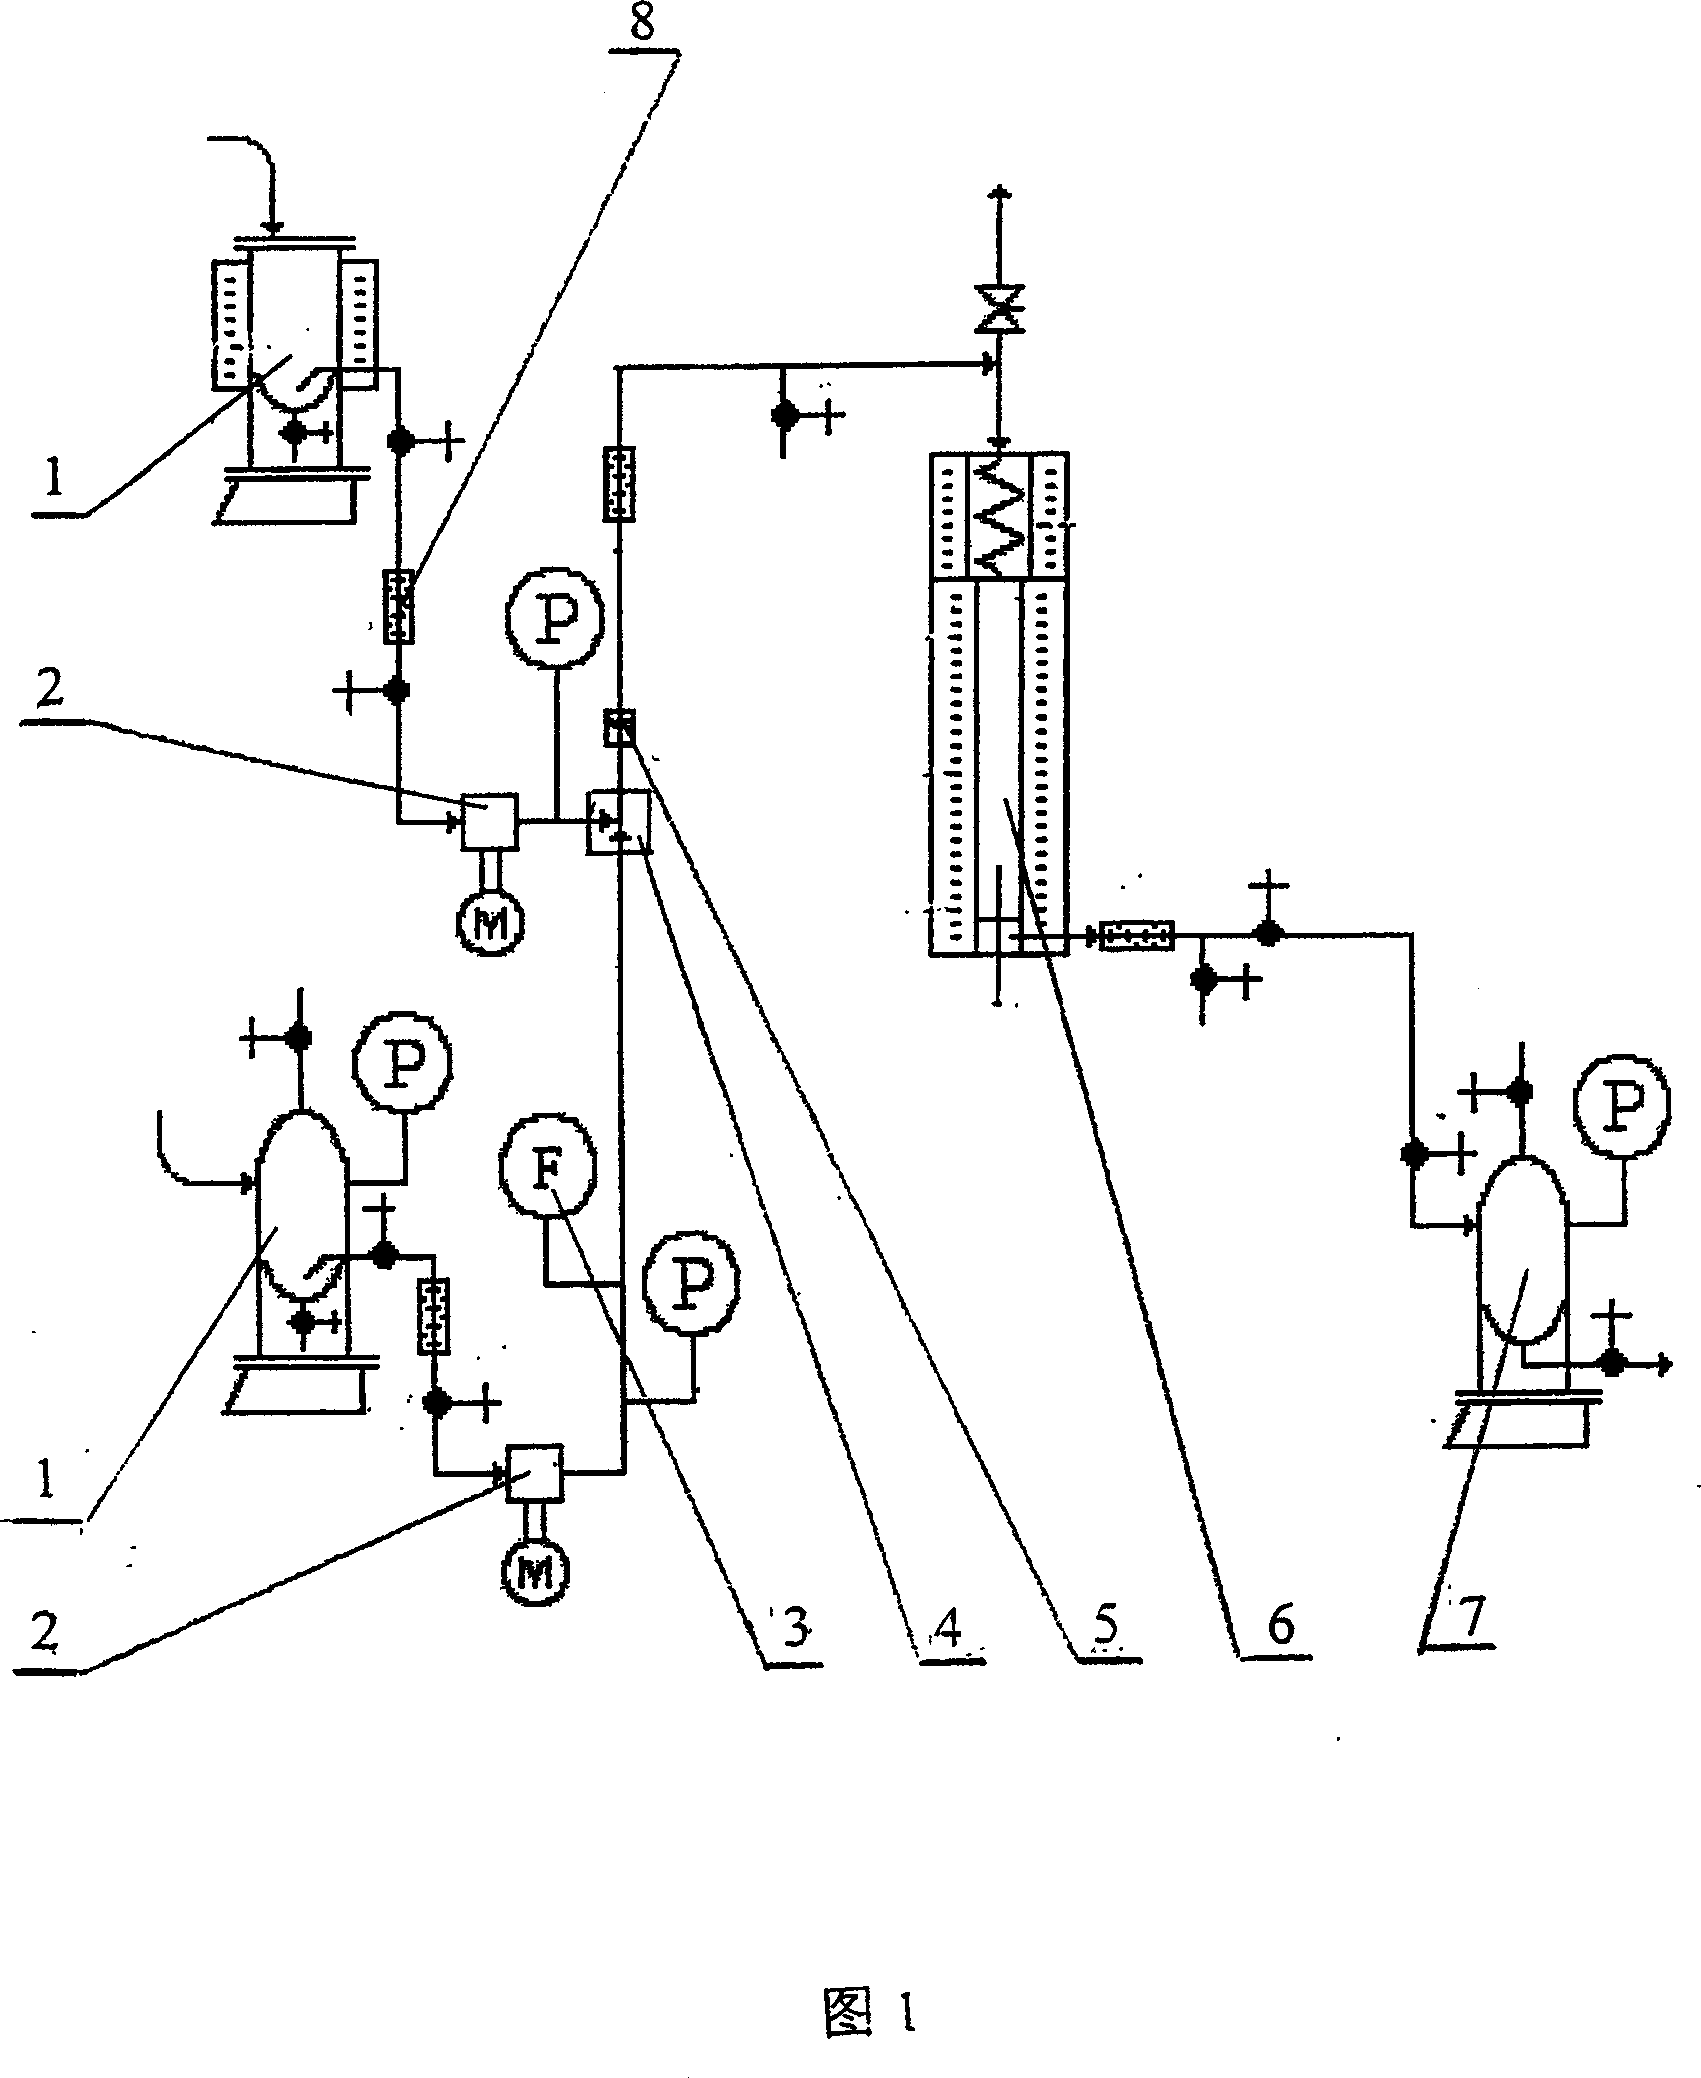 Simulated thermal-insulating reaction experimental method in laboratory